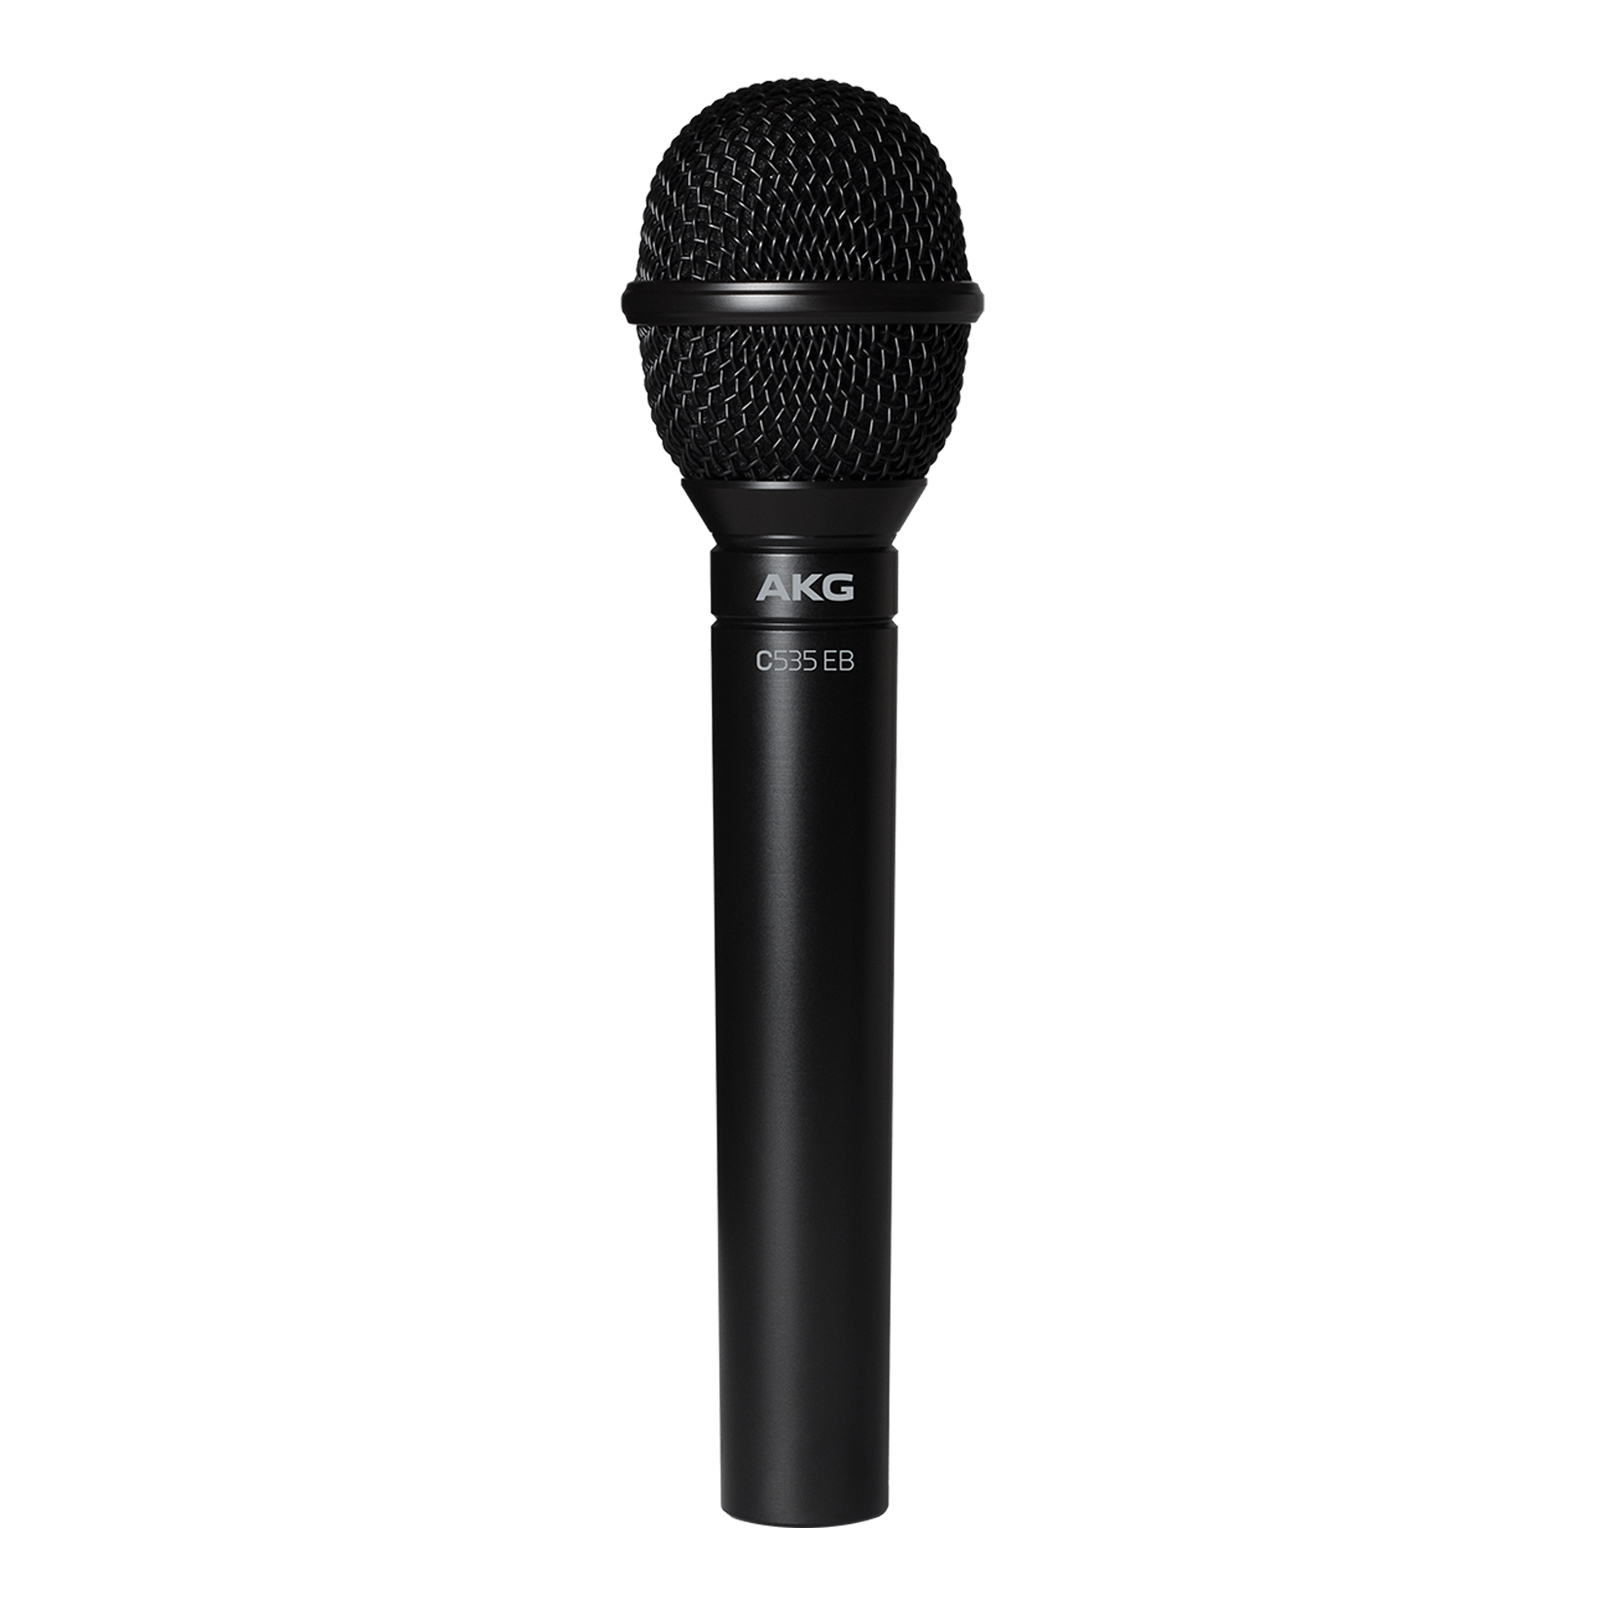 C535 EB | Reference condenser vocal microphone